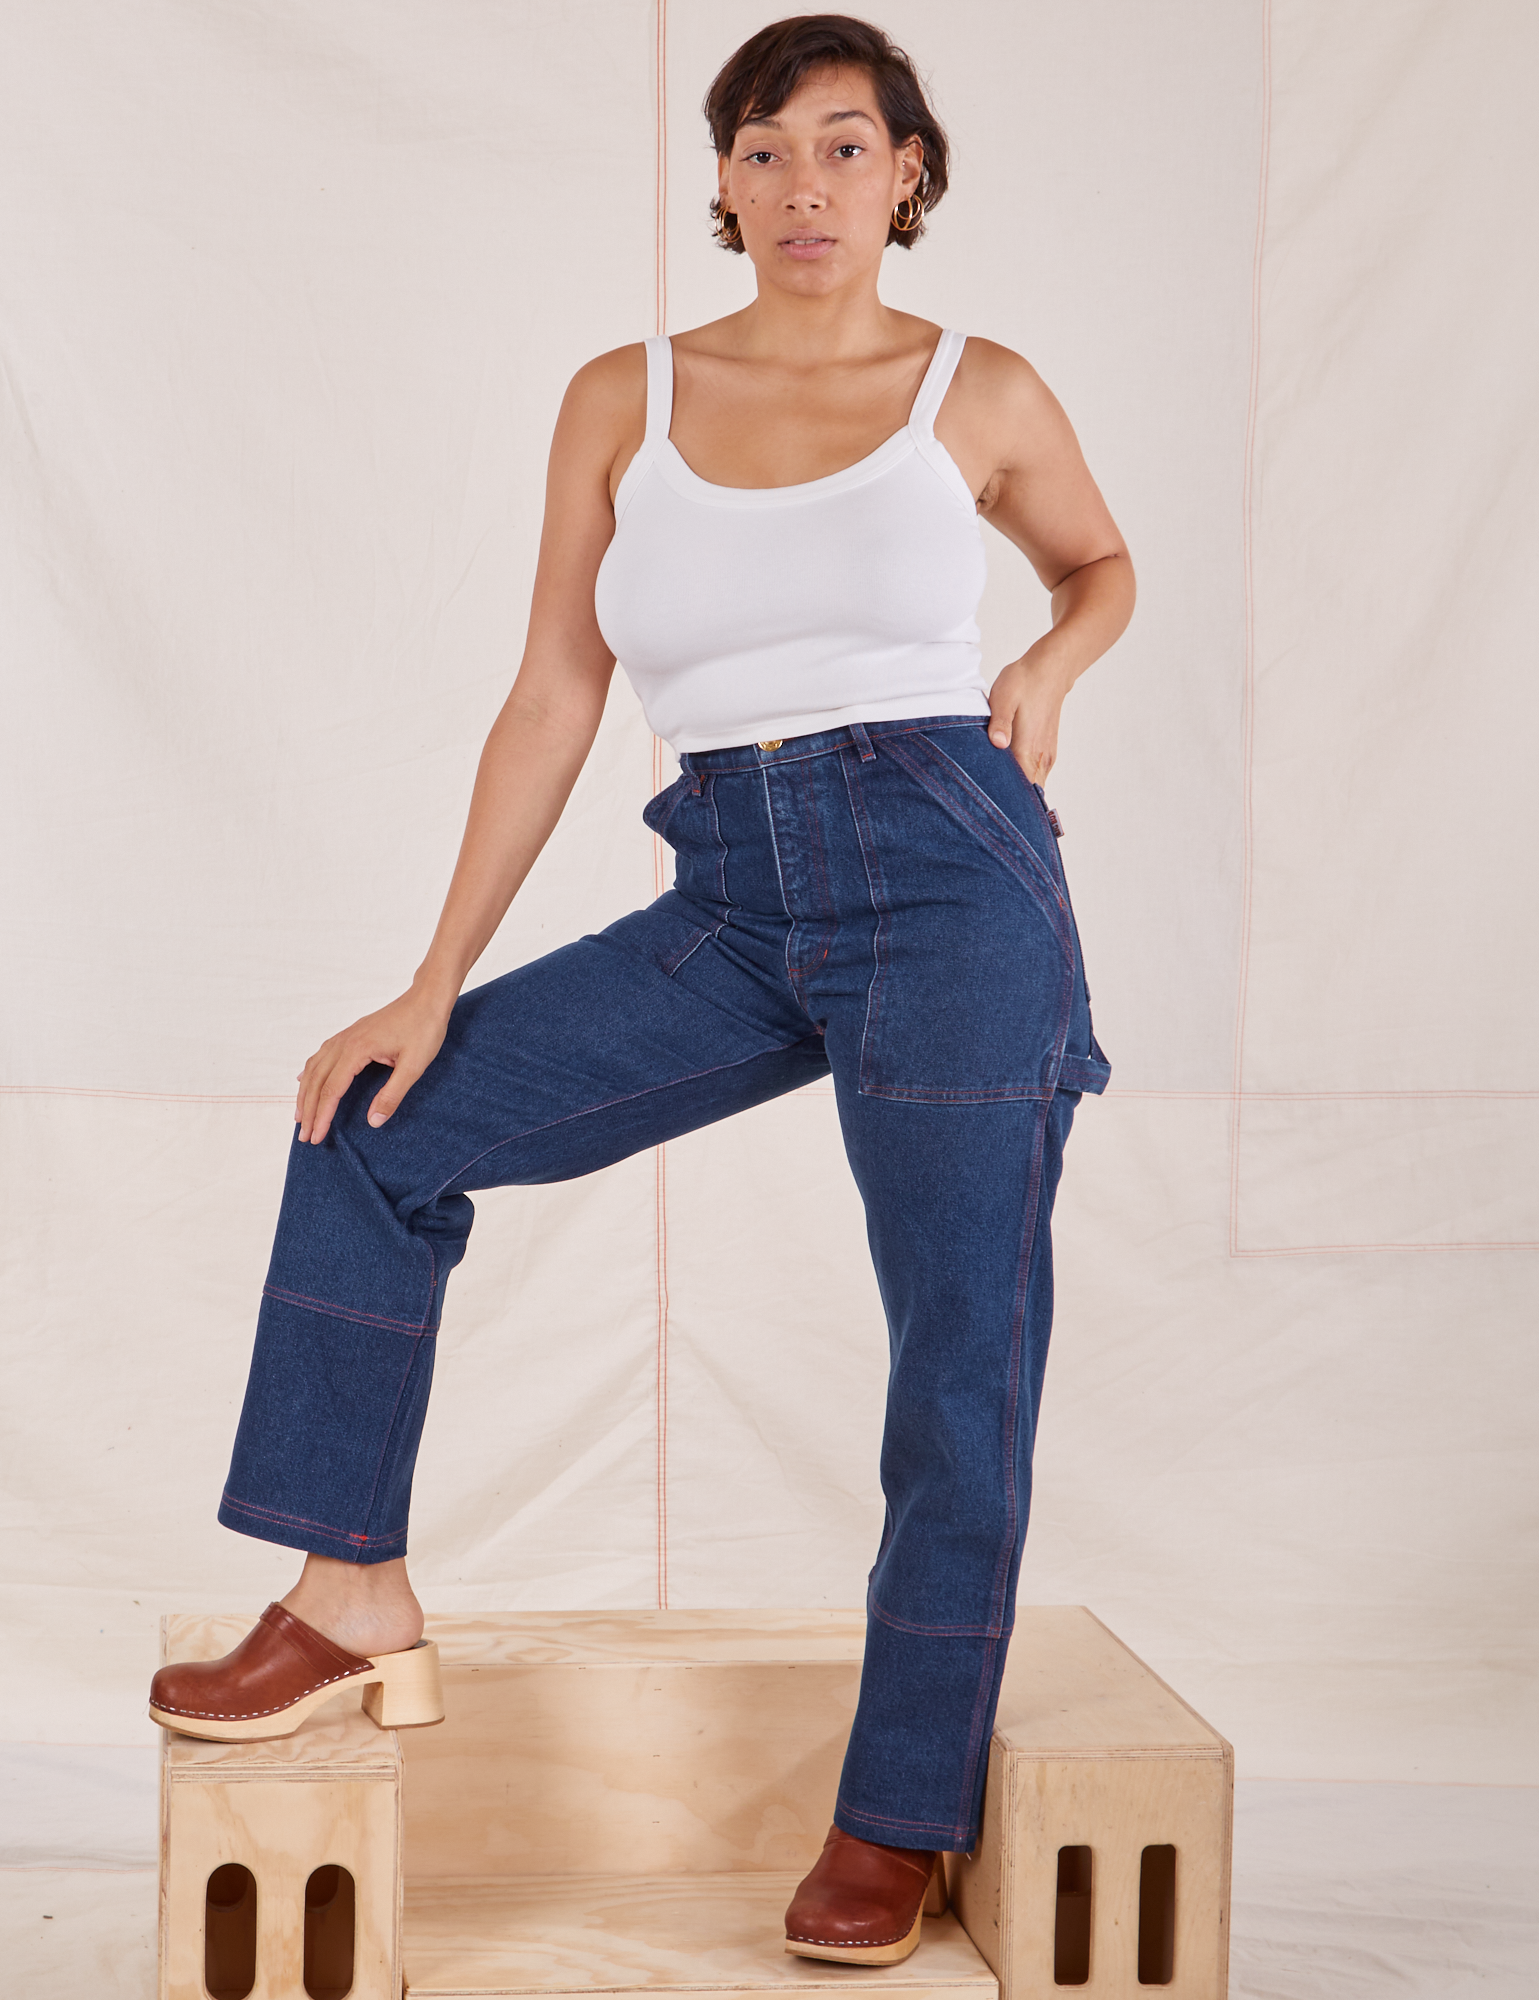 Tiara is 5&#39;4&quot; and wearing S Carpenter Jeans in Dark Wash paired with a vintage off-white Cami